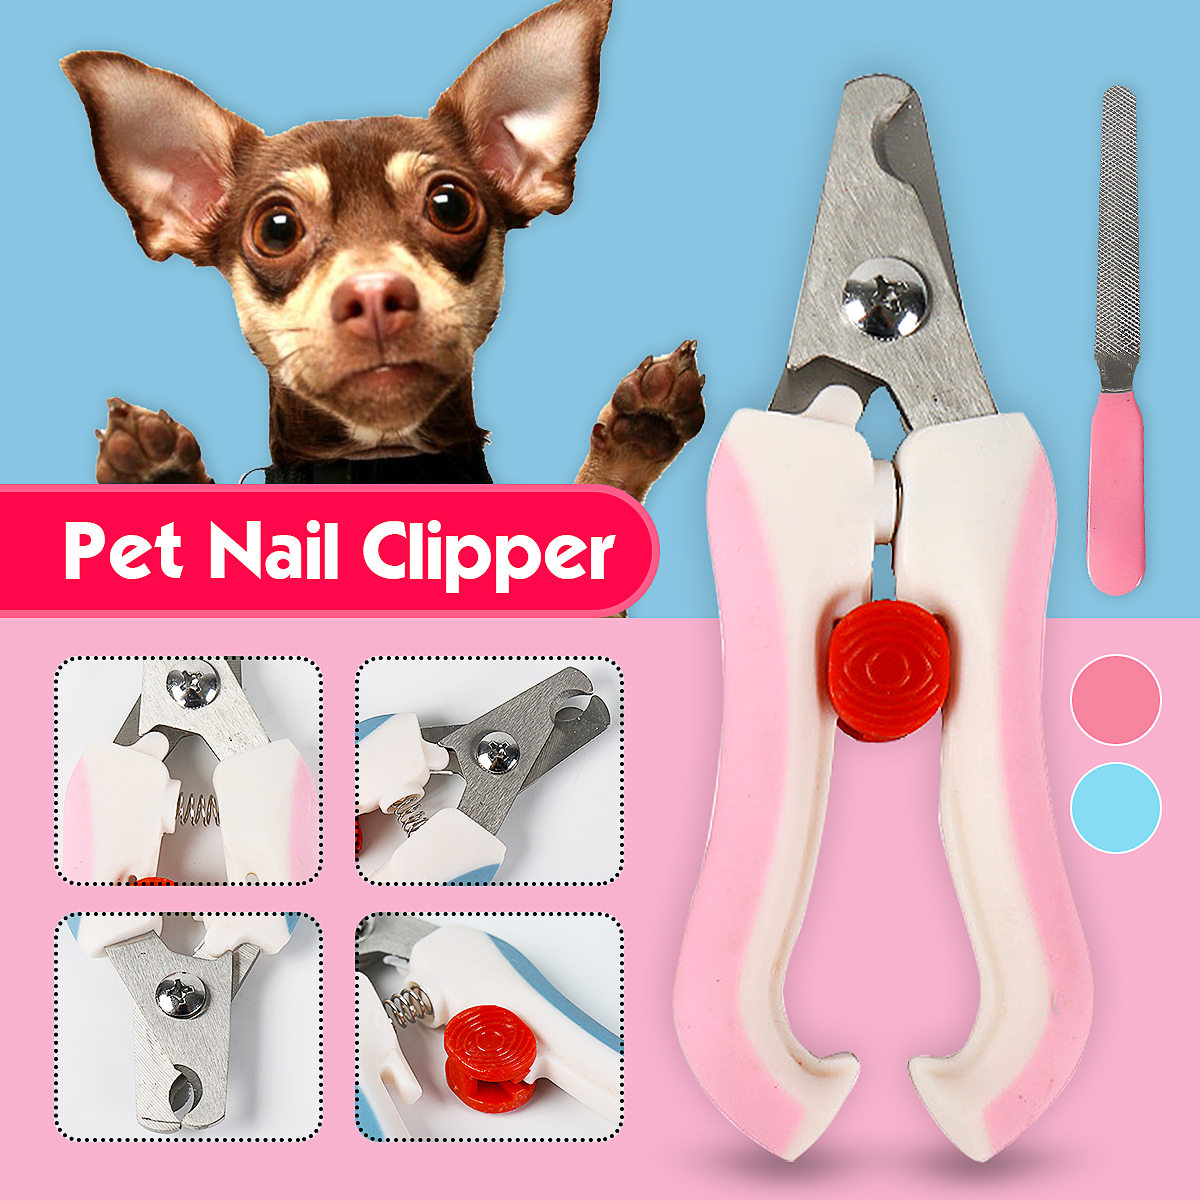 Pet-Dog-Cat-Claw-Nail-File-Scissors-Toe-Clipper-Cutter-Trimmer-Stainless-Steel-Cutter-Tool-1705426-2